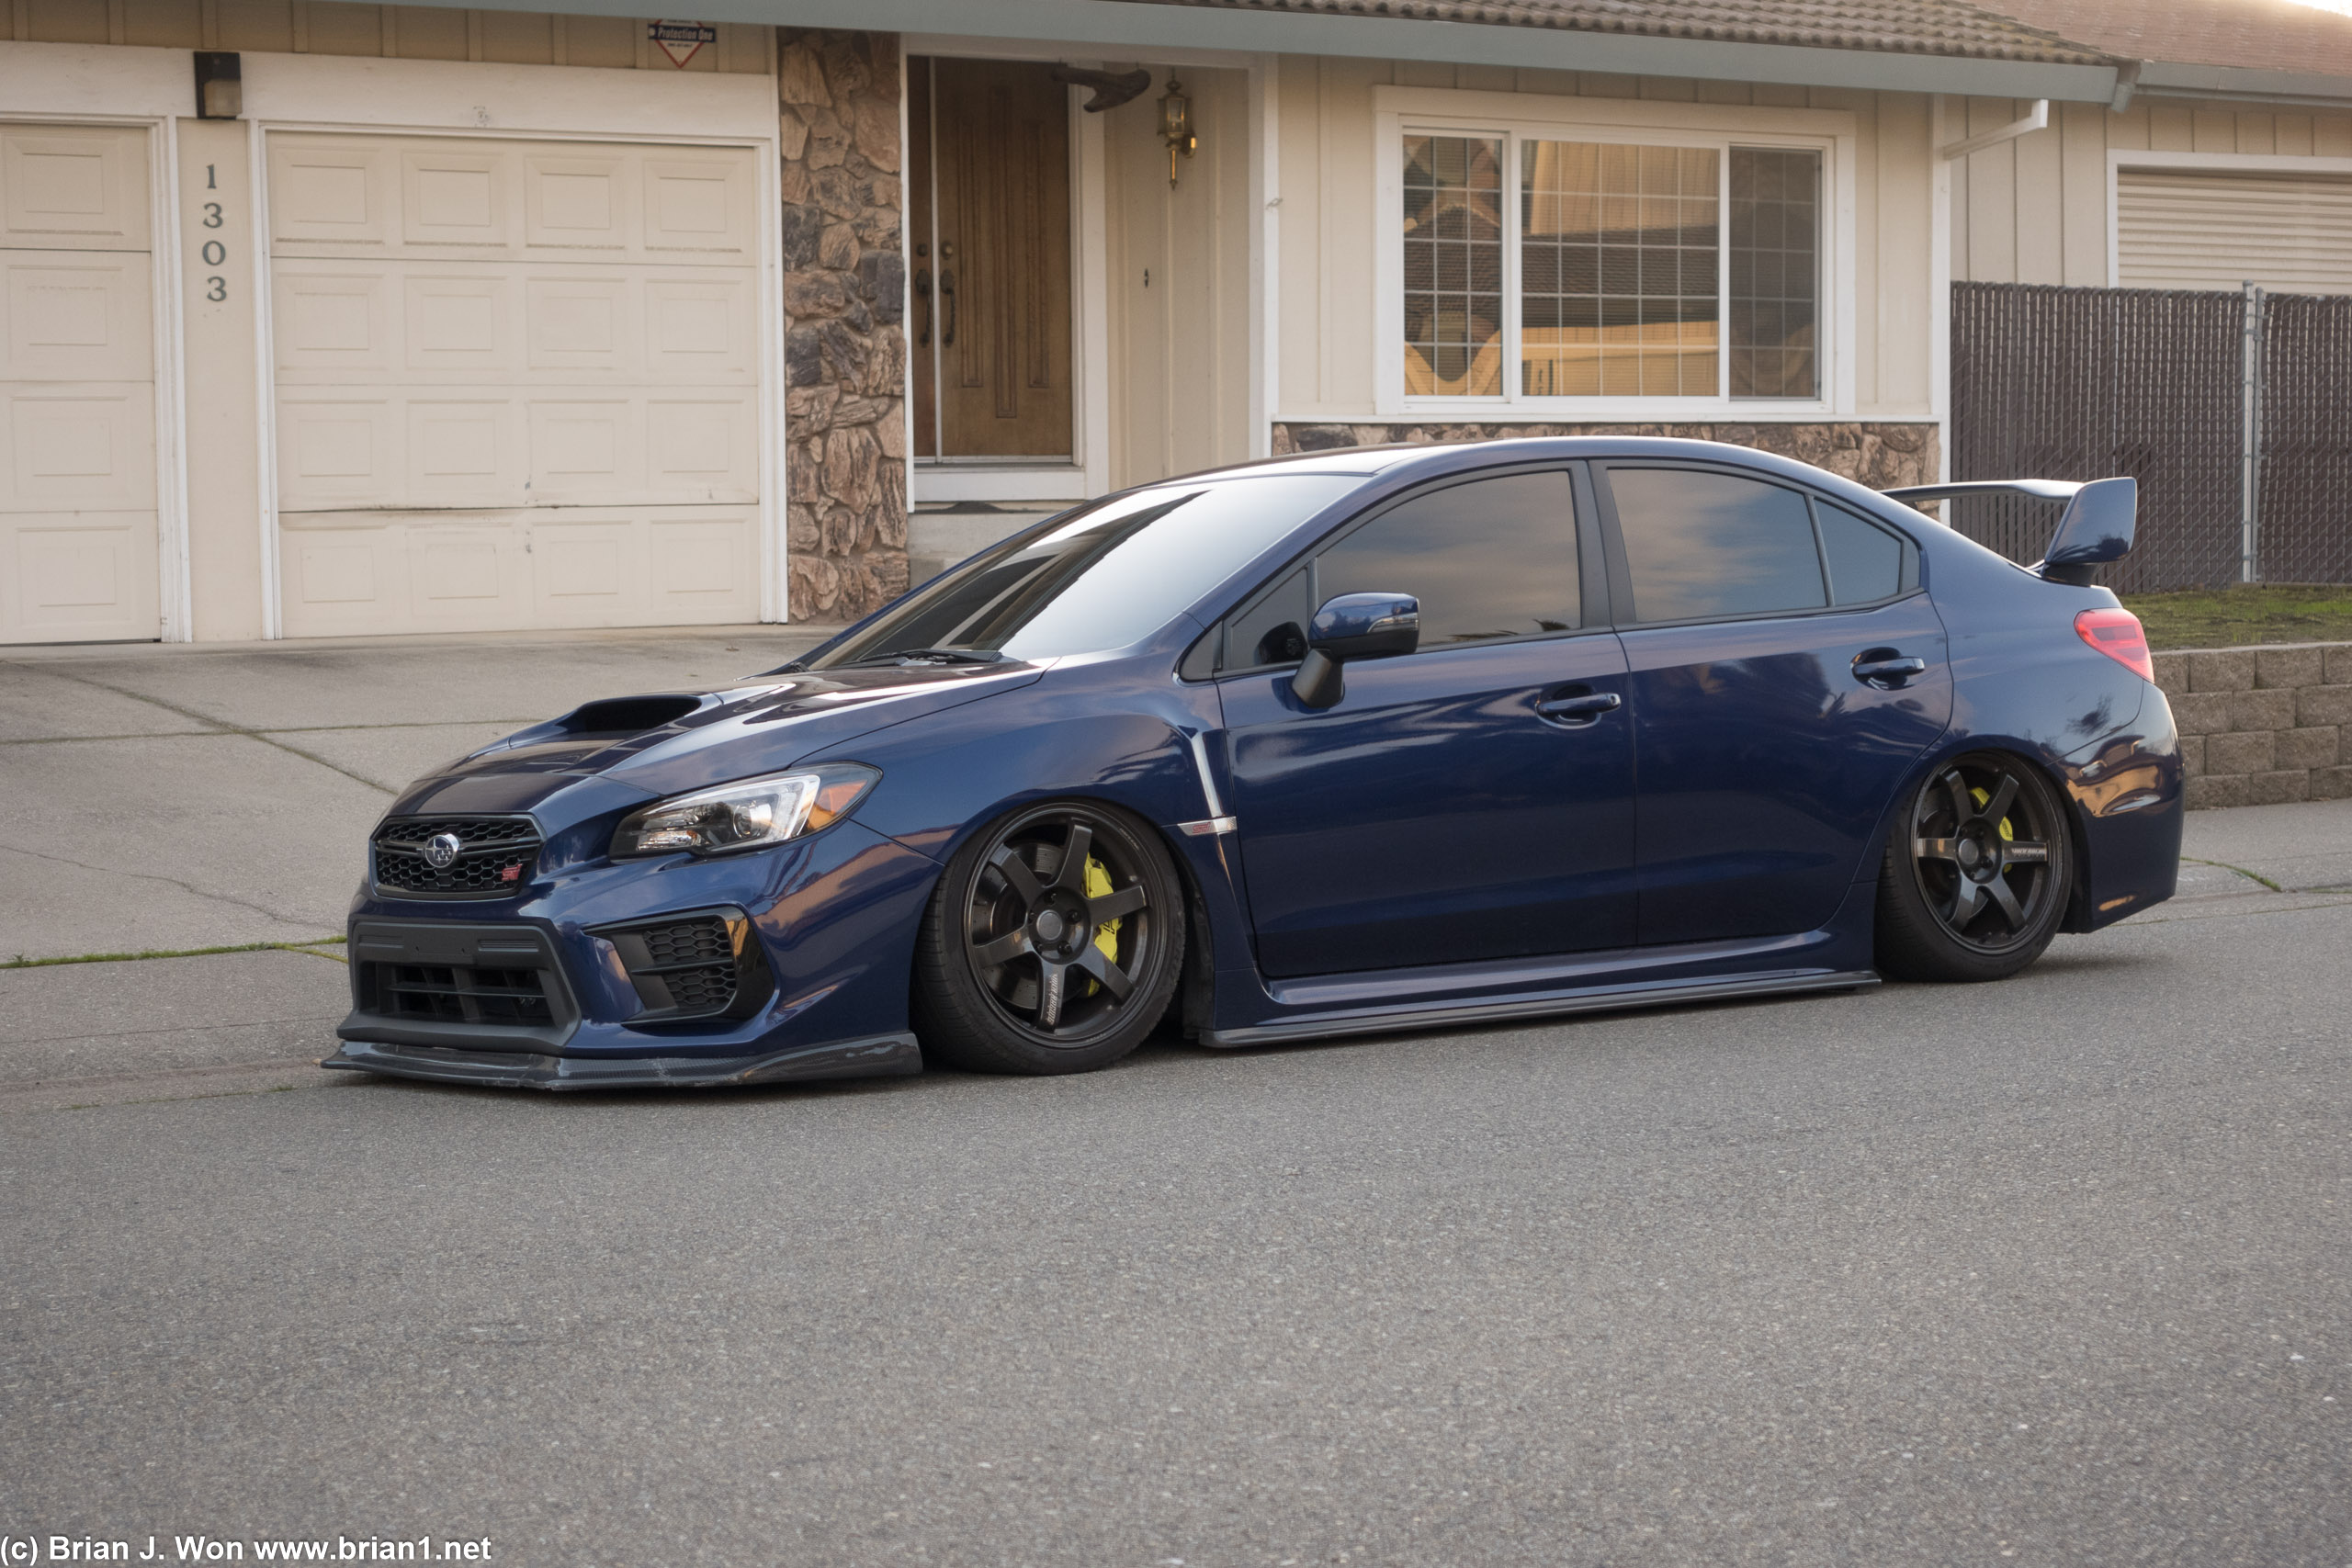 This poor WRX STI (VA) is si low it probably has issues going over carpet and leaves.